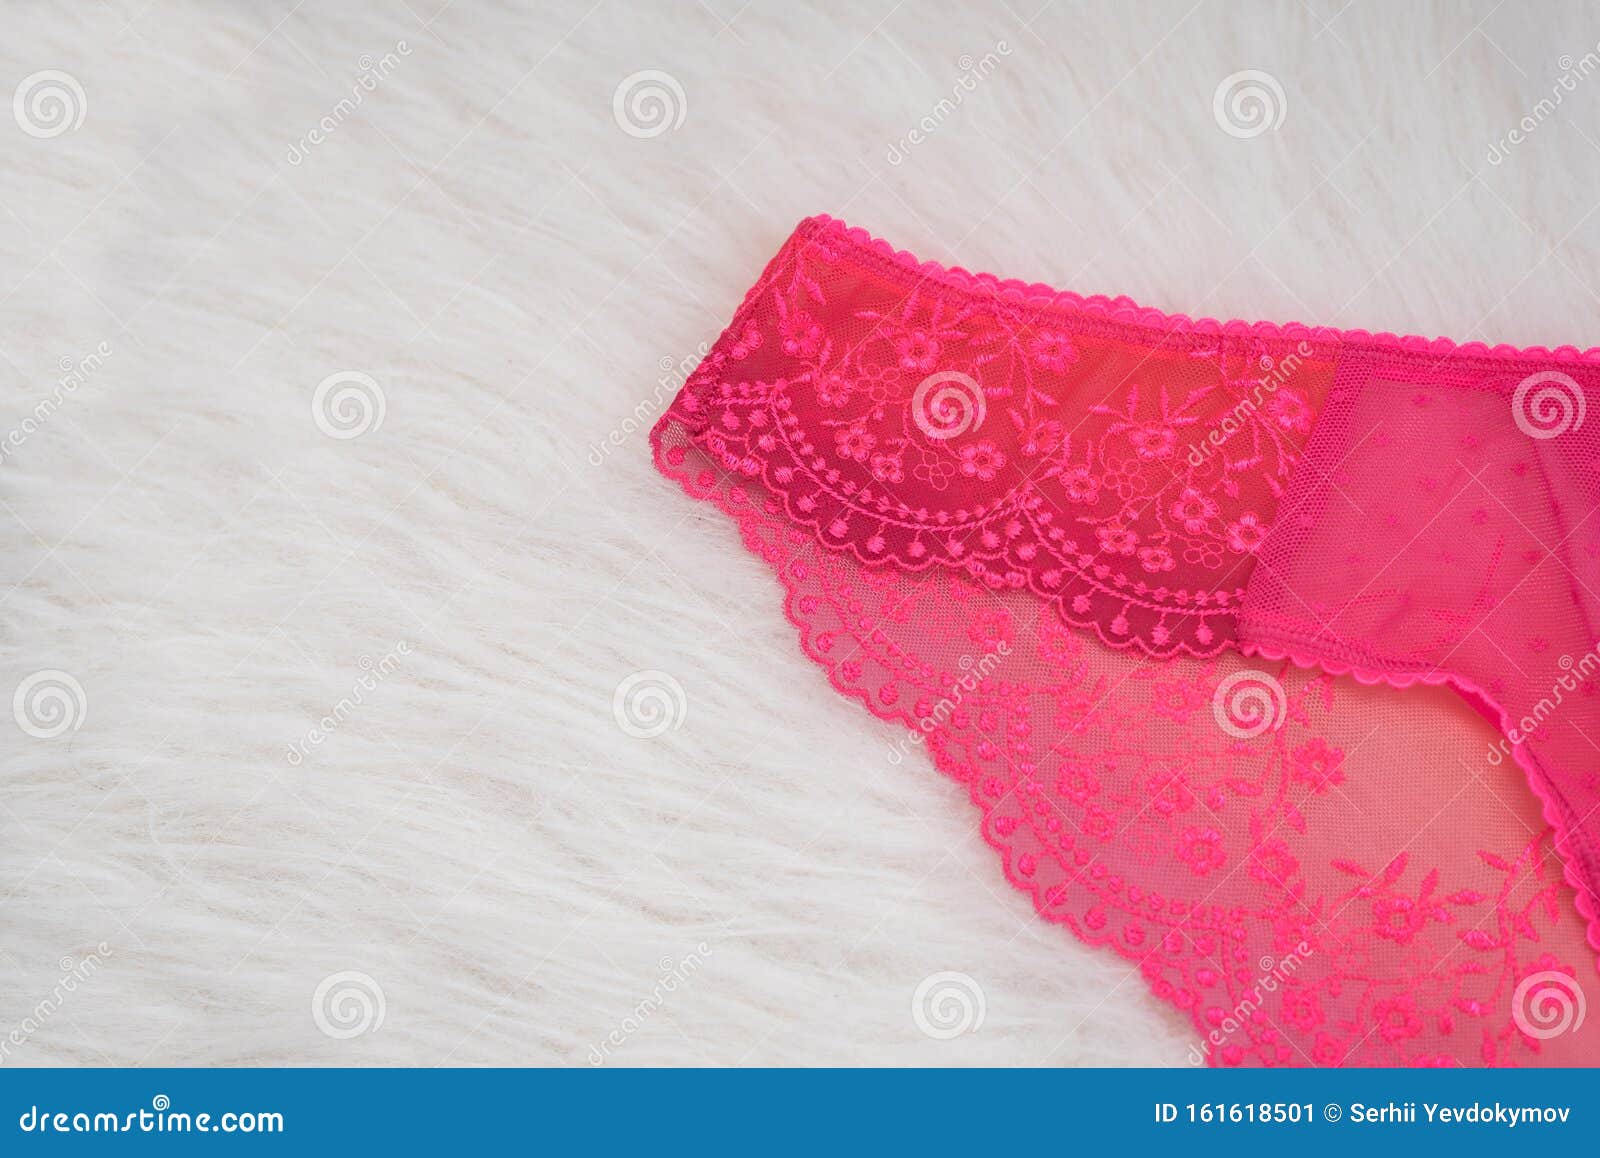 Part of Lacy Bright Pink Panties on White Fur. Close Up Stock Image - Image  of lacy, female: 161618501